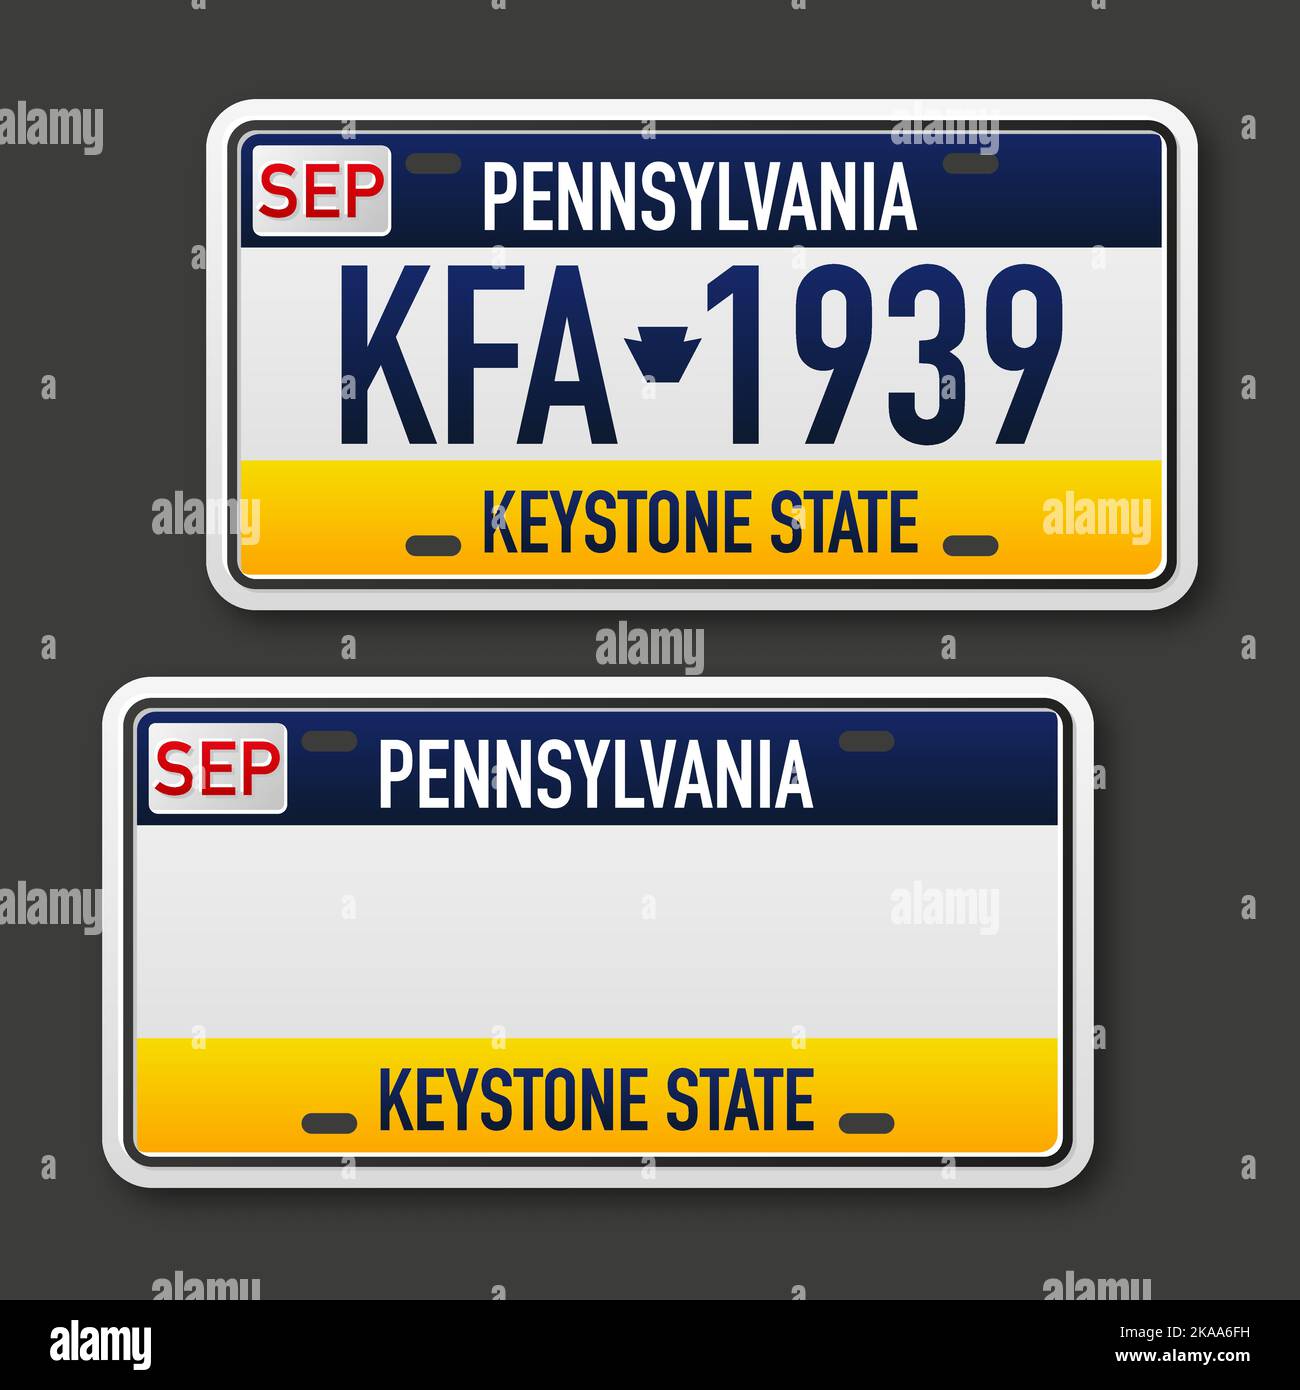 Retro car plate for banner design. Pennsylvania state. Isolated vector illustration. Business, icon set Stock Vector